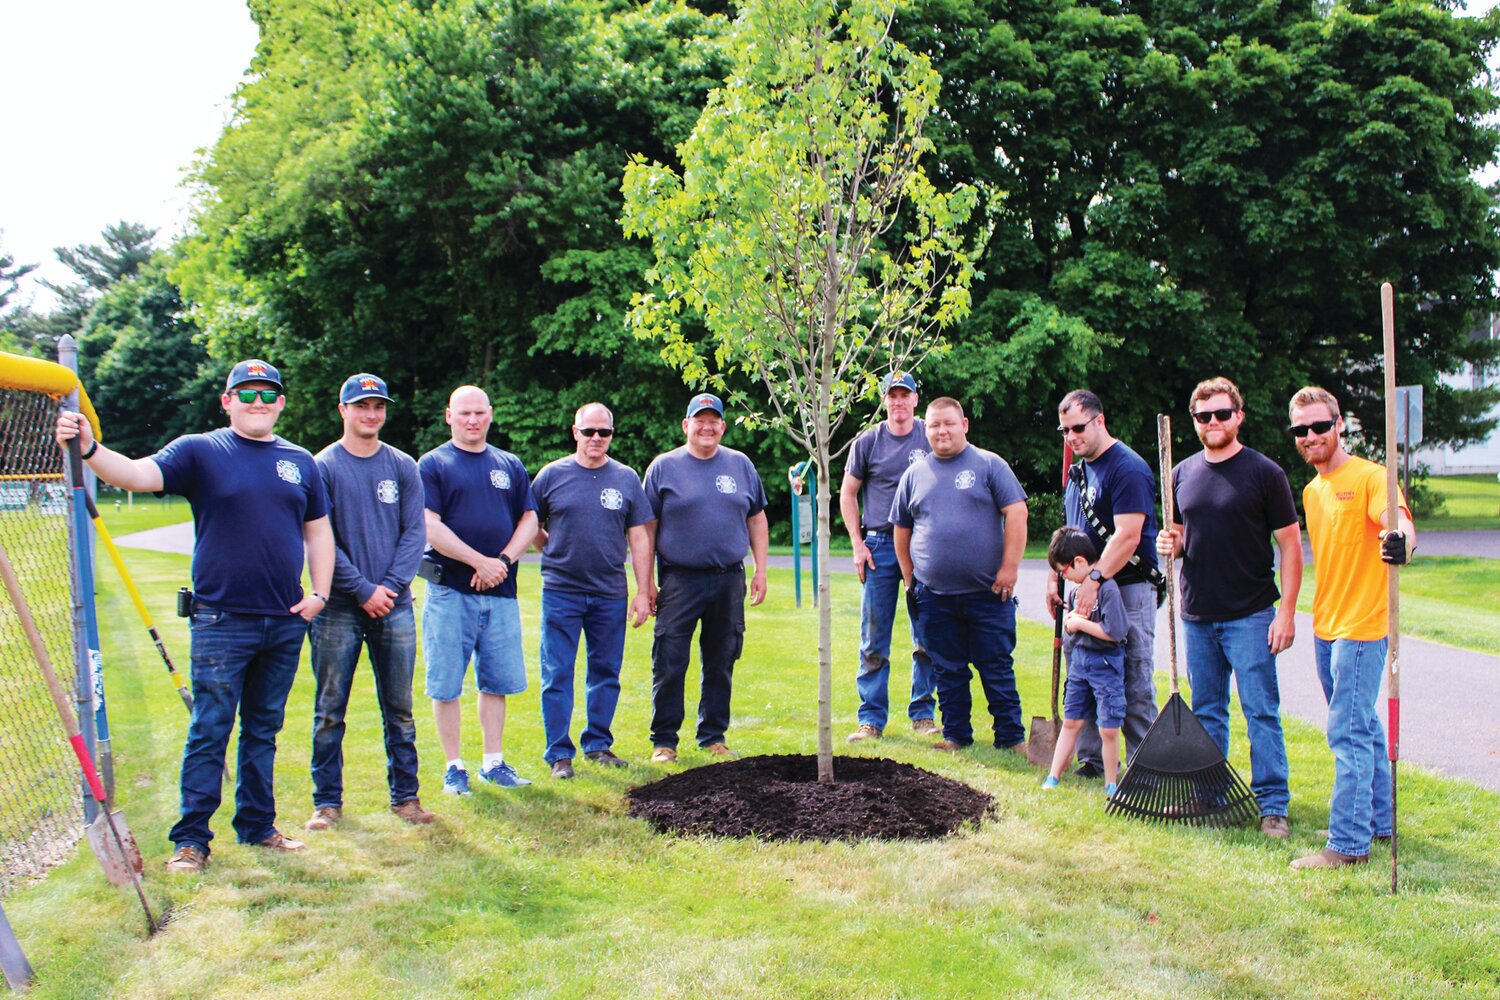 Volunteers gather around one of the trees planted in Hilltown Civic Park. The tree-planting event was hosted by Hilltown Township Public Works and the Travis Manion Foundation and participants included 20 members of the Hilltown Township Volunteer Fire Company.